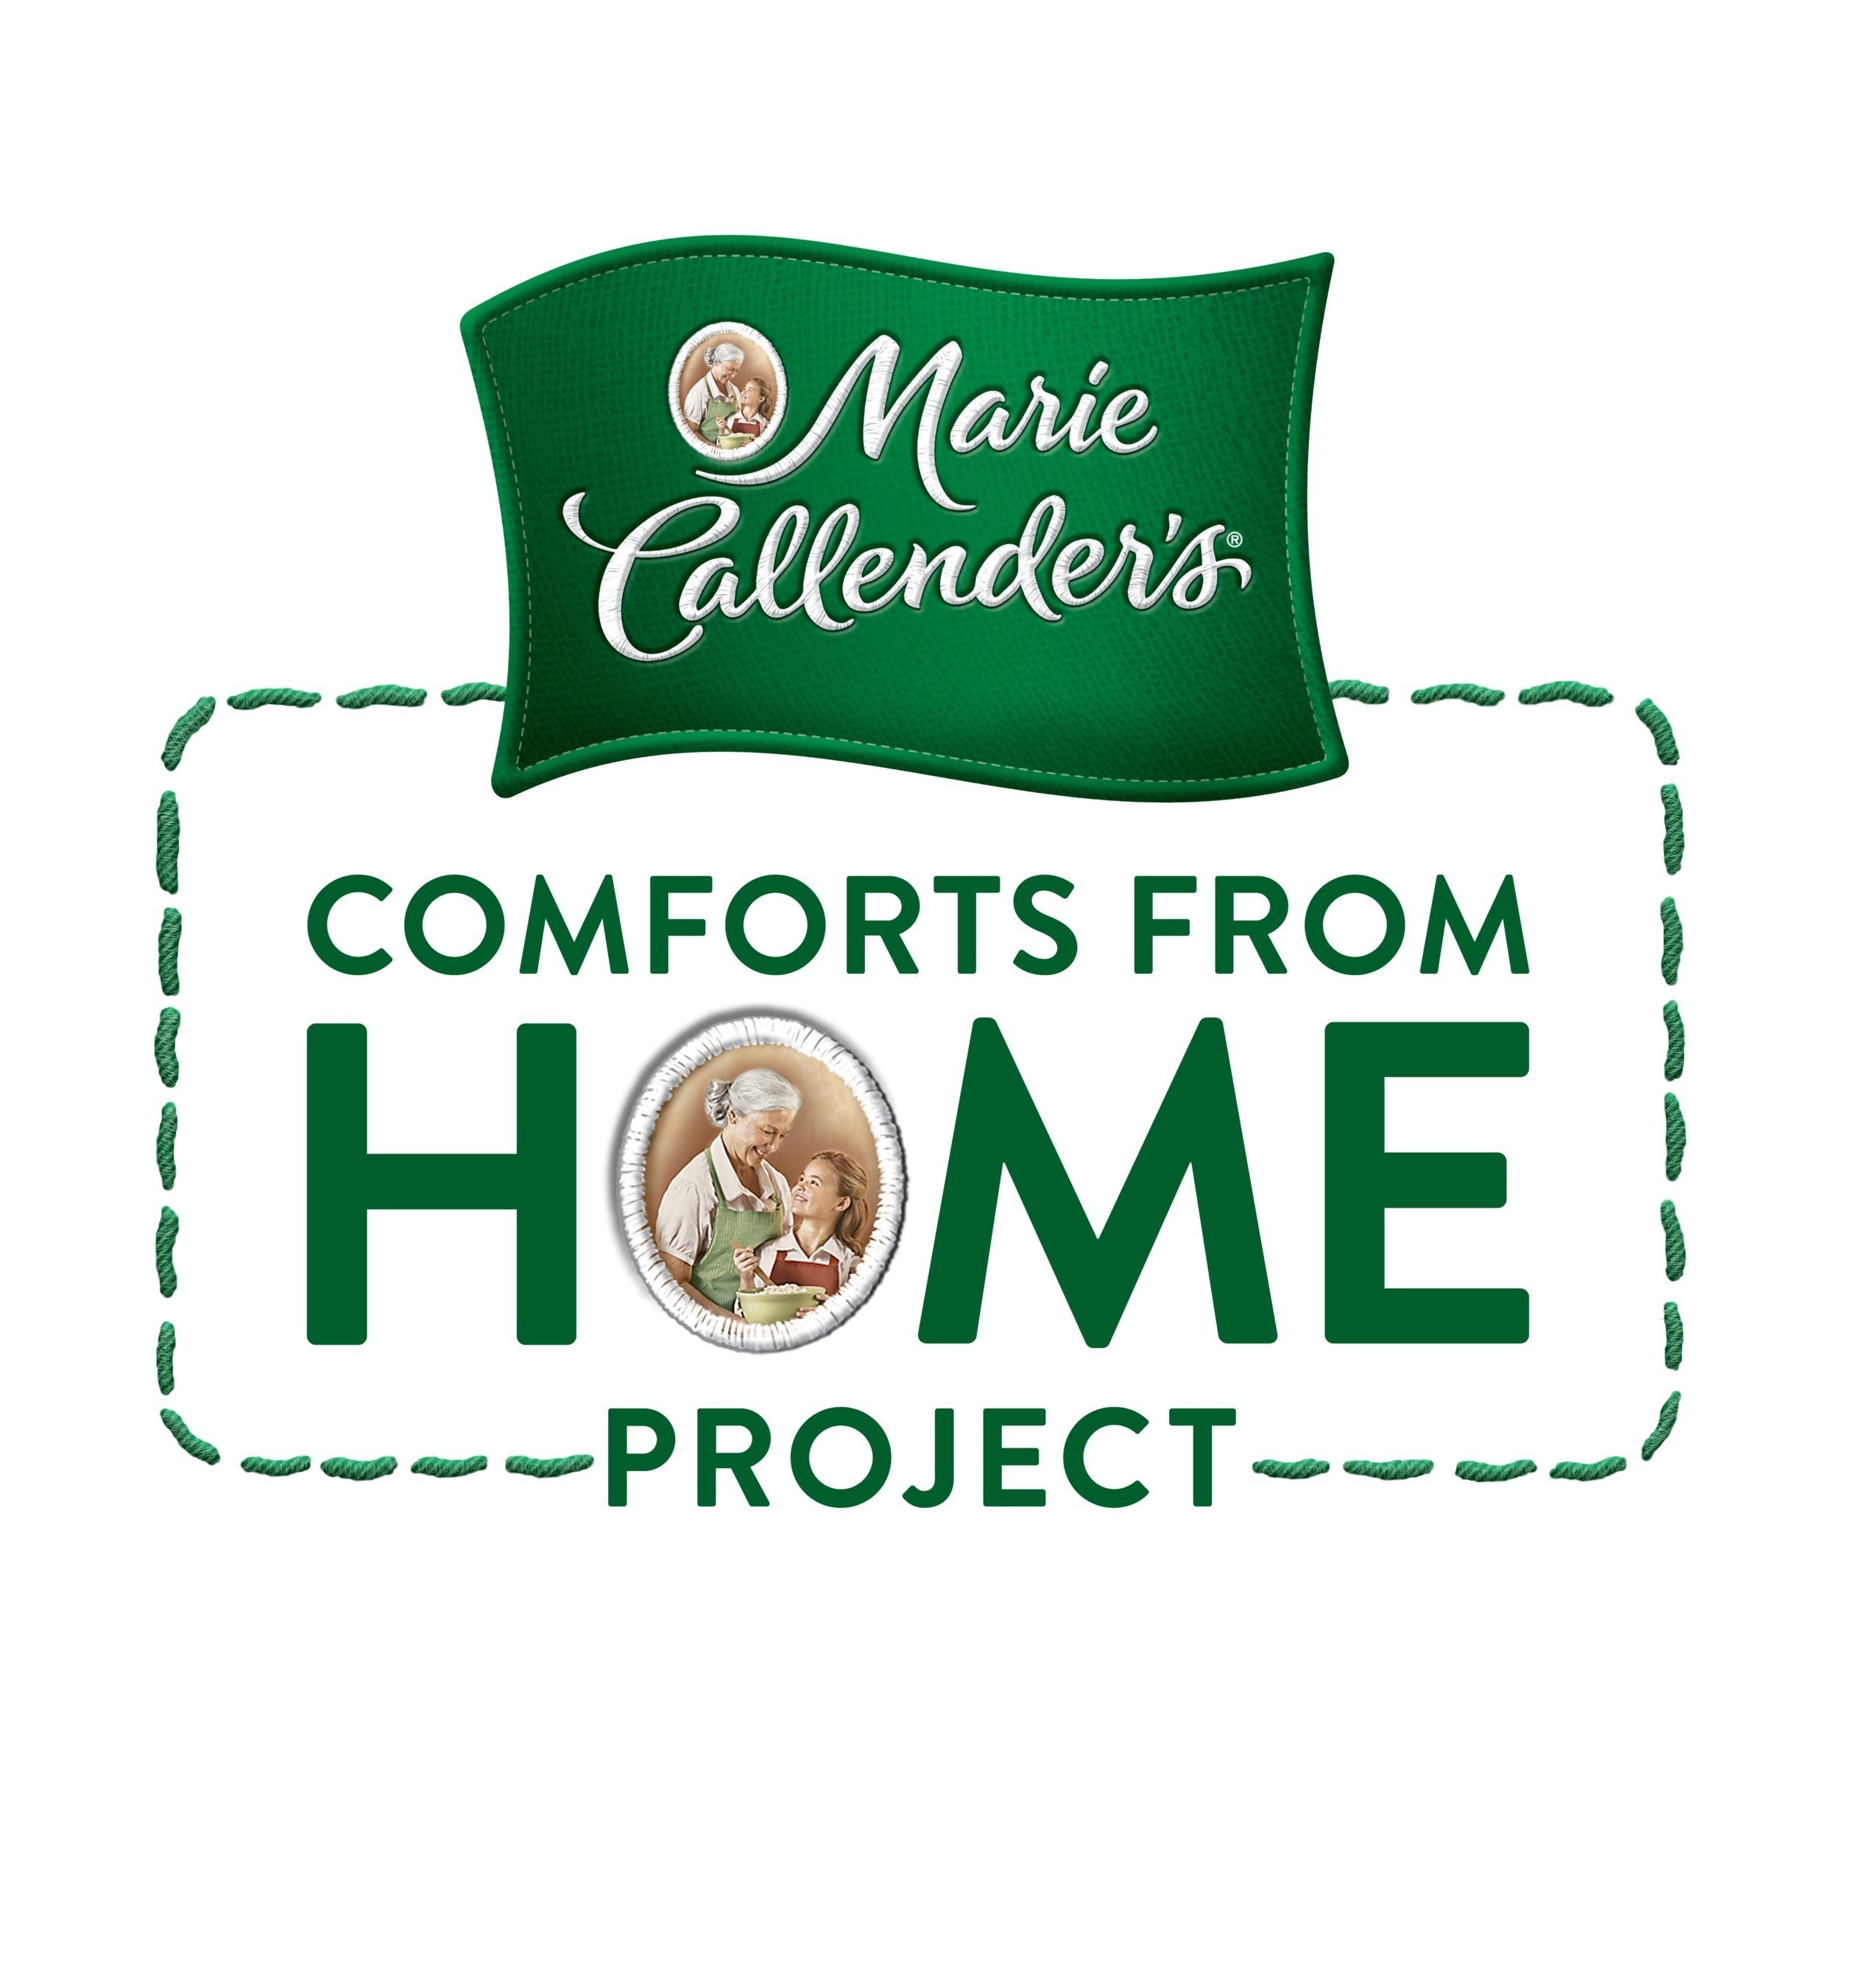 Join the Marie Callender's(R) Comforts From Home Project to celebrate and support our troops. Because home isn't just where the heart is-home is where Marie is.